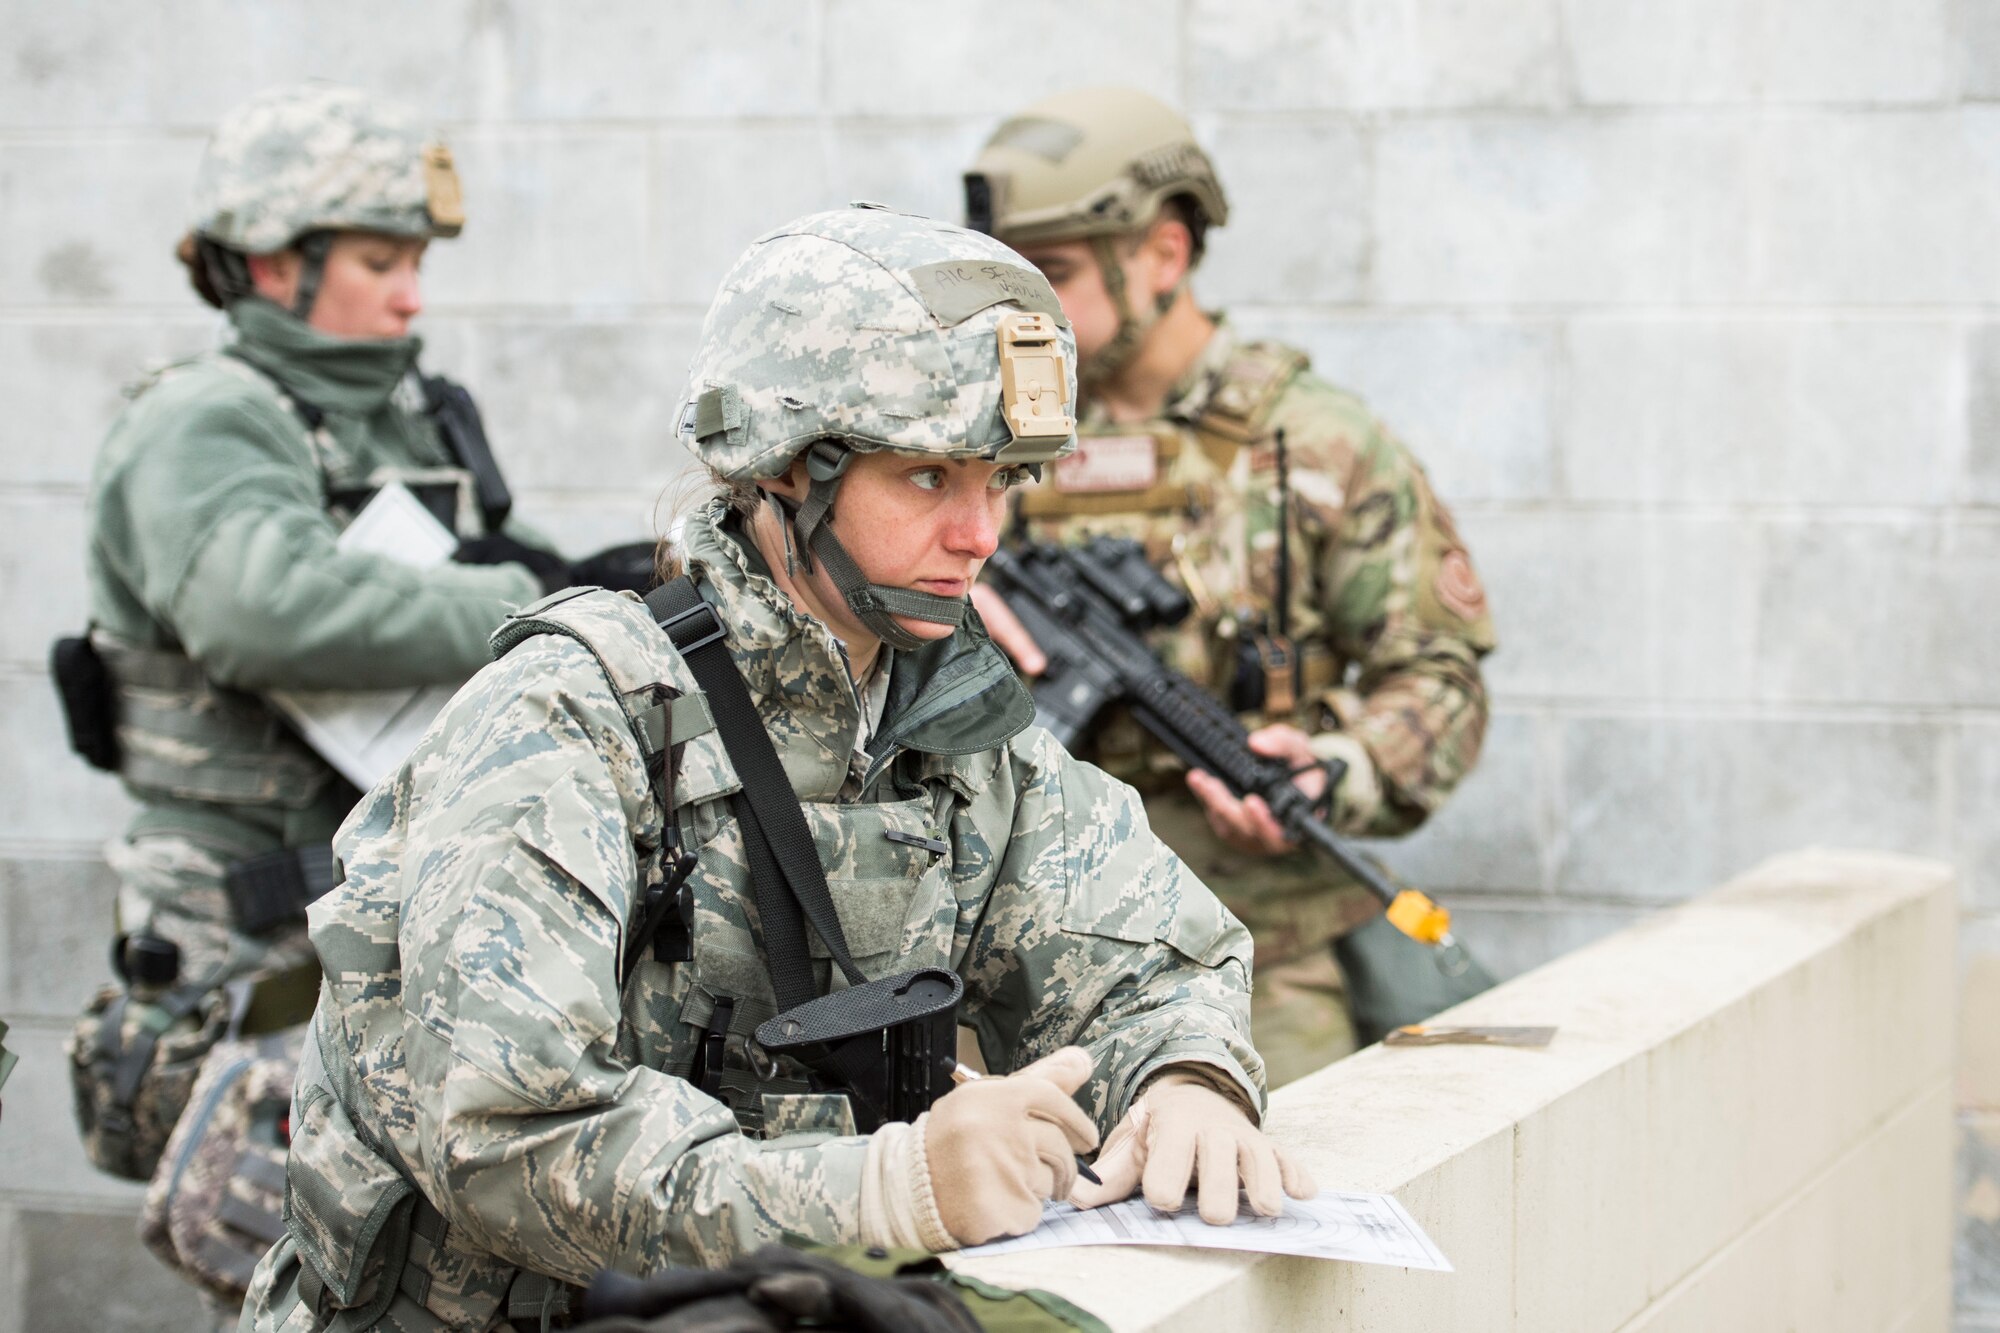 Airman 1st Class Kayla Sine, assigned to the 167th Security Forces Squadron, makes notes during a training exercise at Alpena Combat Readiness Training Center, Alpena, Mich., May 7, 2019. Approximately 300 167th AW Airmen participated in the training event. (U.S. Air National Guard photo by Tech. Sgt. Jodie Witmer)